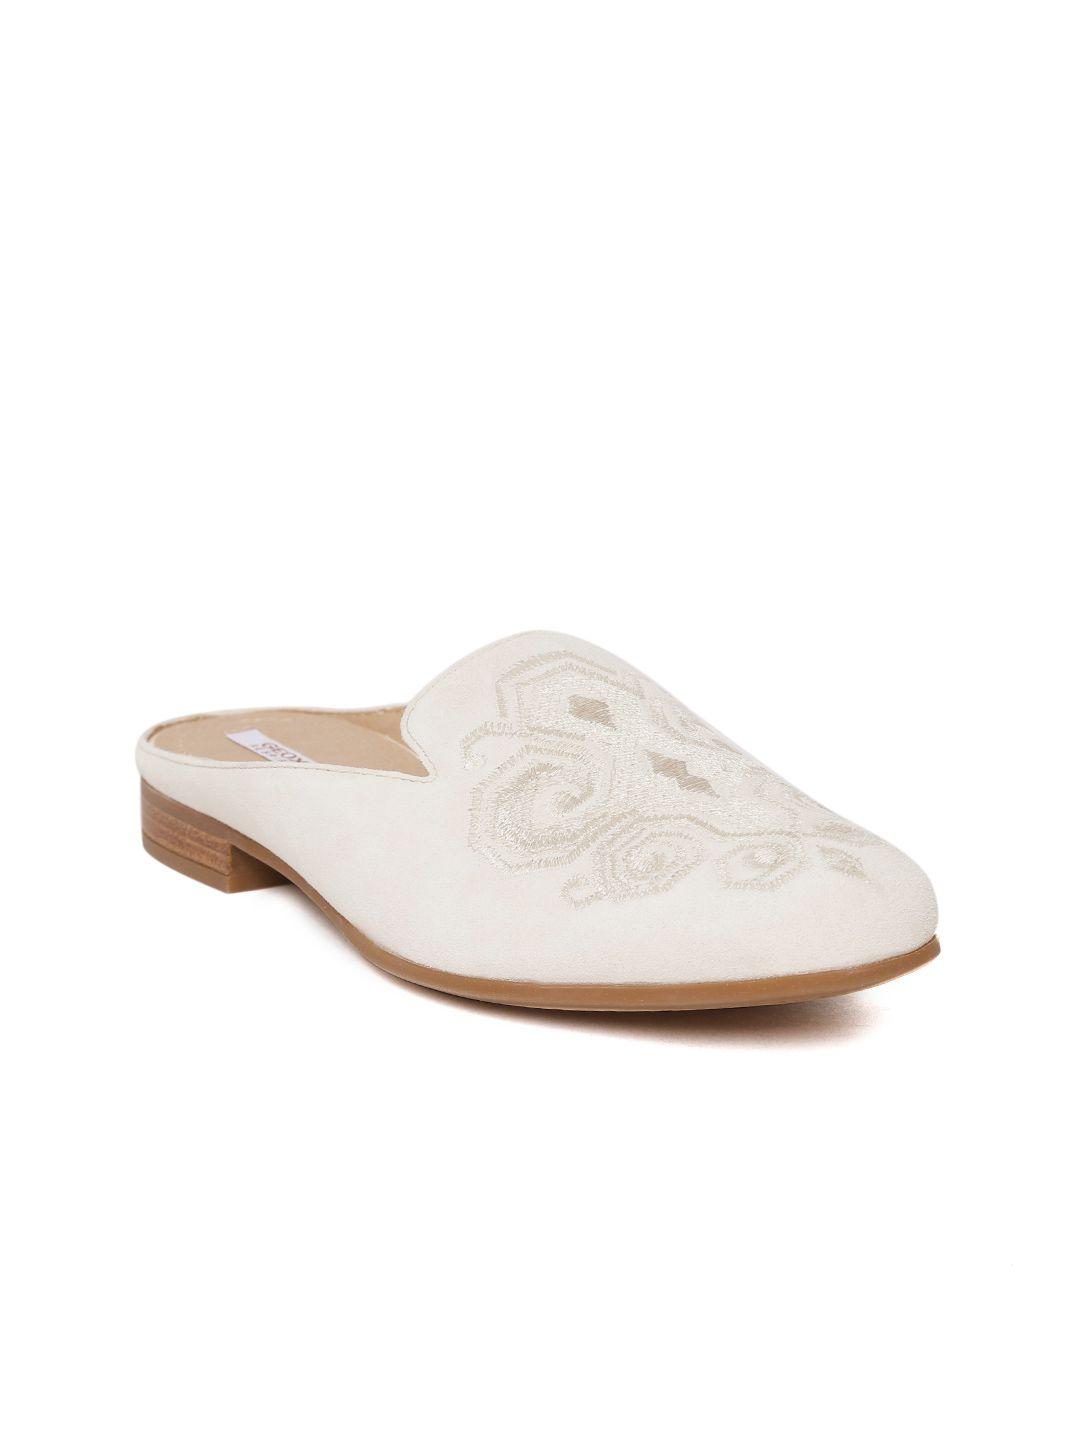 geox women off-white suede leather embroidered mules